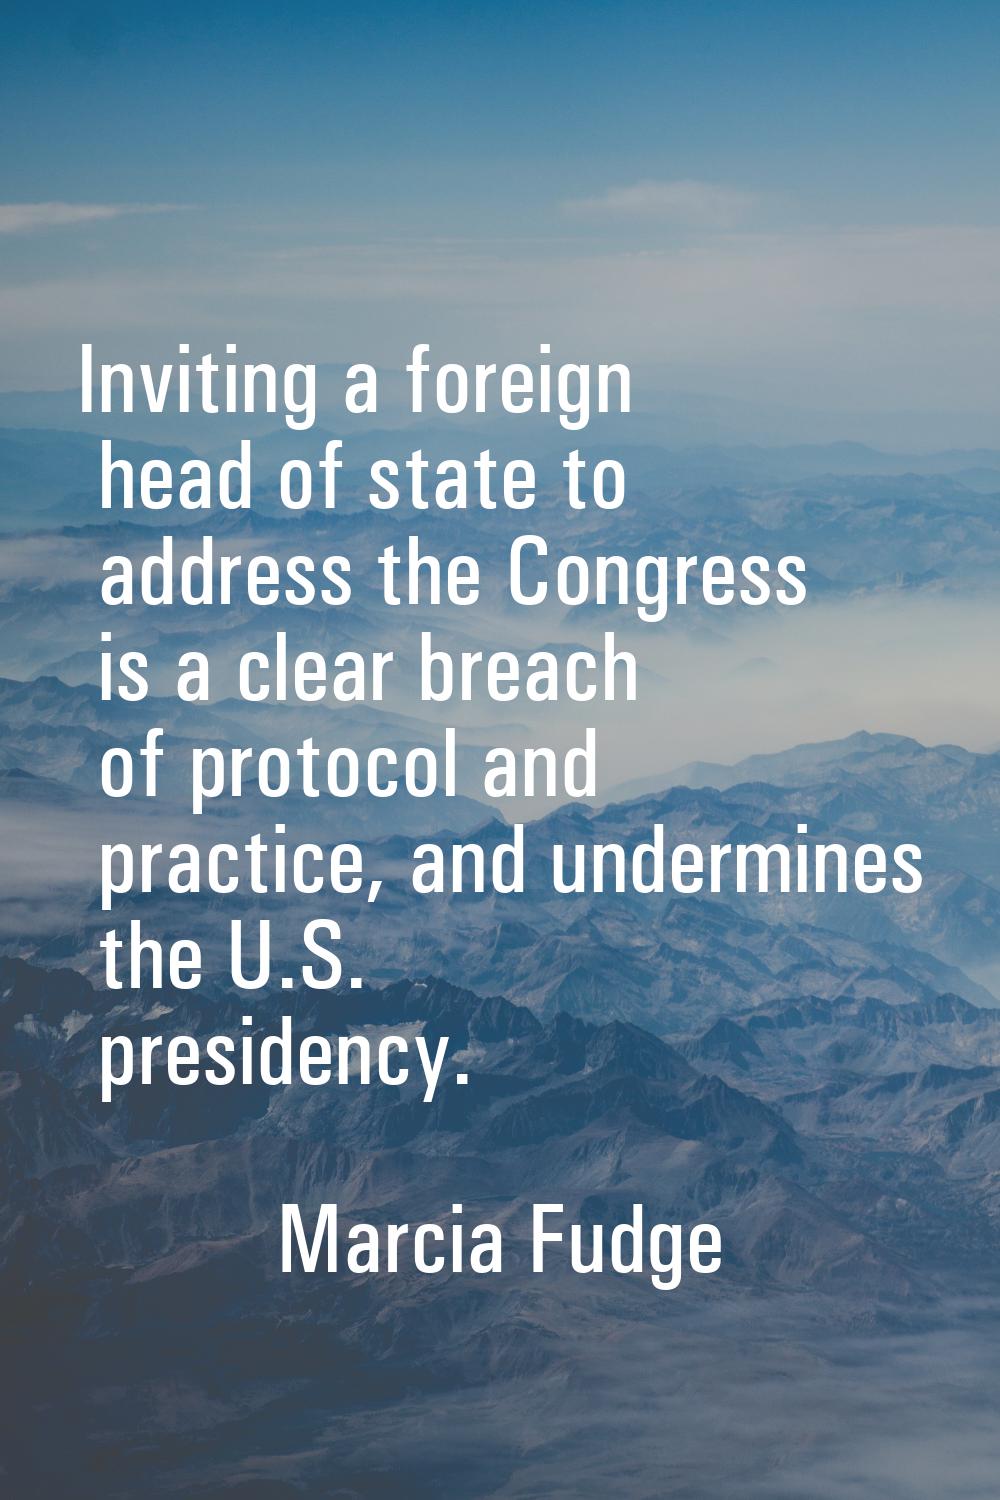 Inviting a foreign head of state to address the Congress is a clear breach of protocol and practice